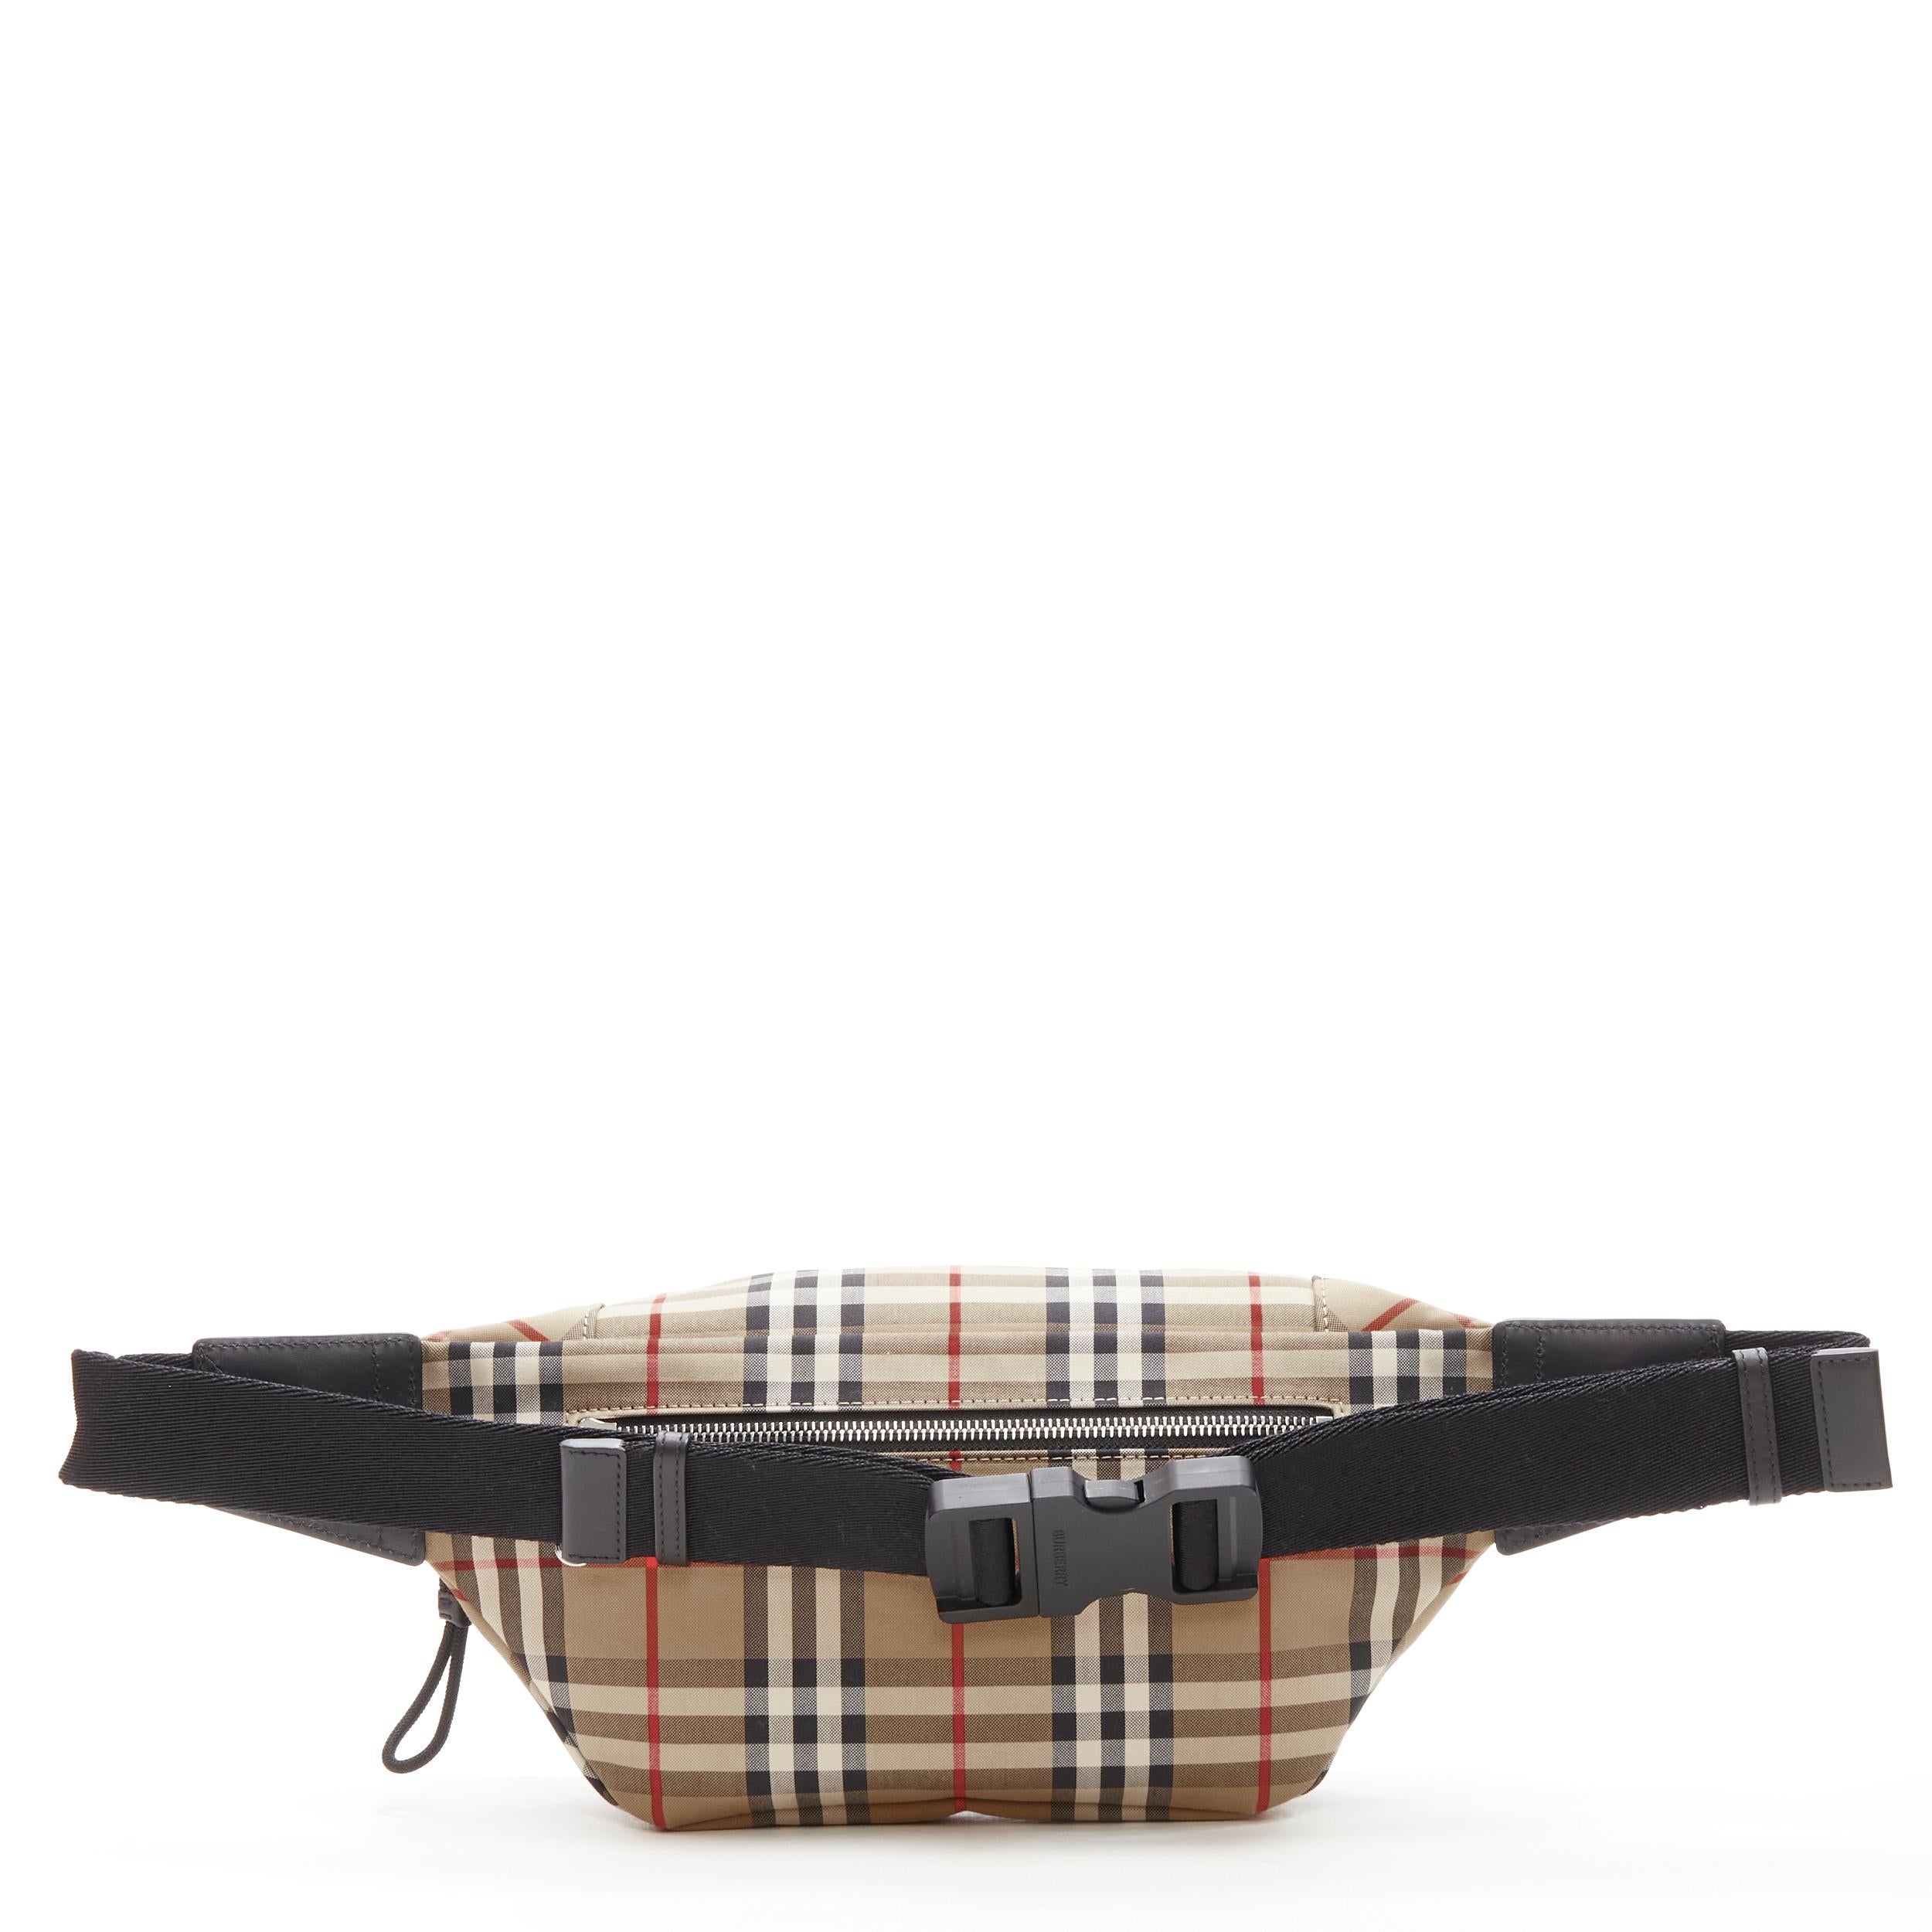 burberry fanny pack